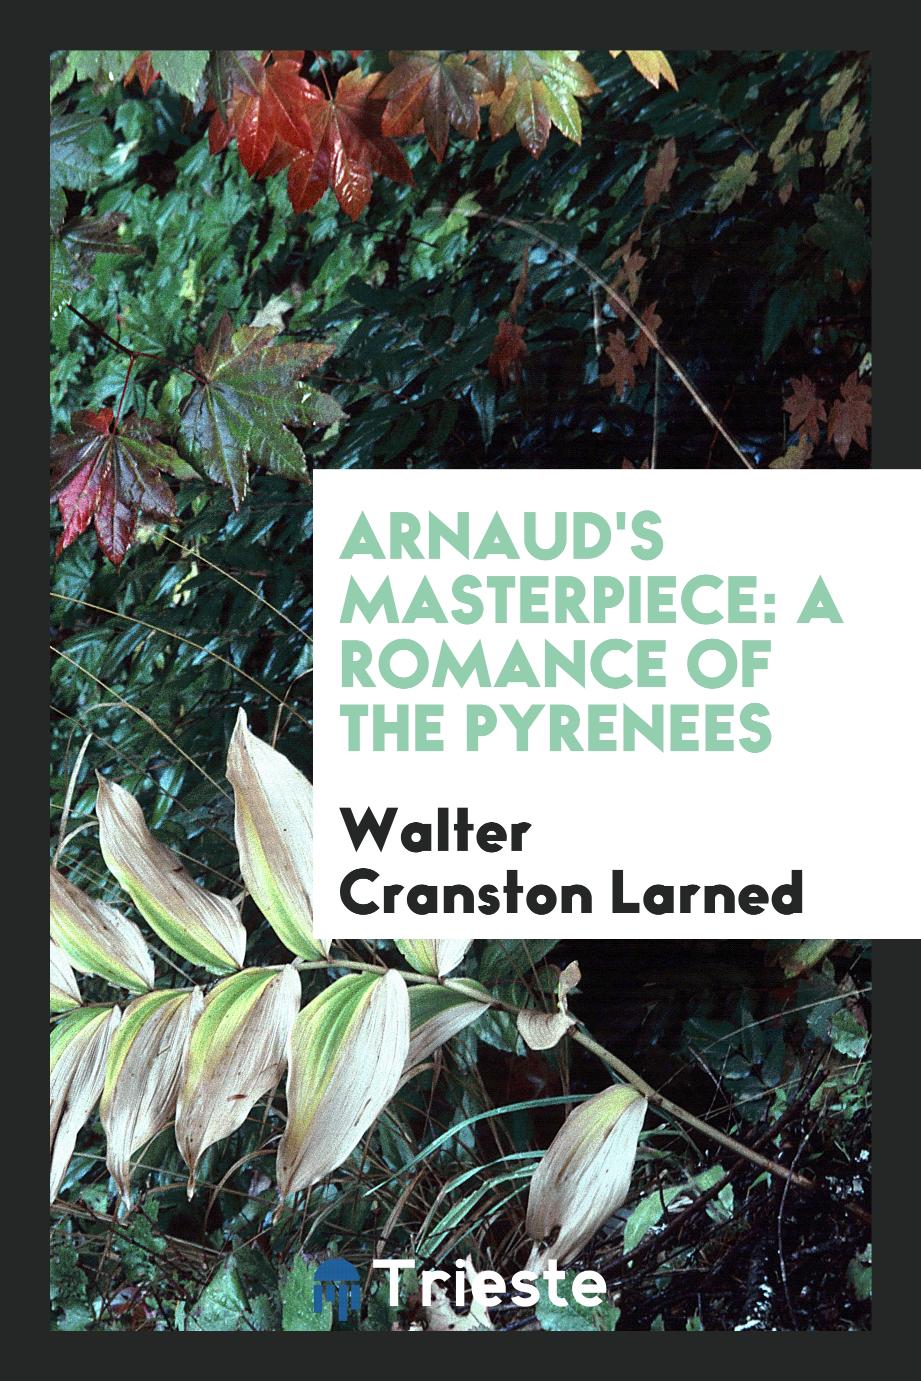 Arnaud's Masterpiece: A Romance of the Pyrenees